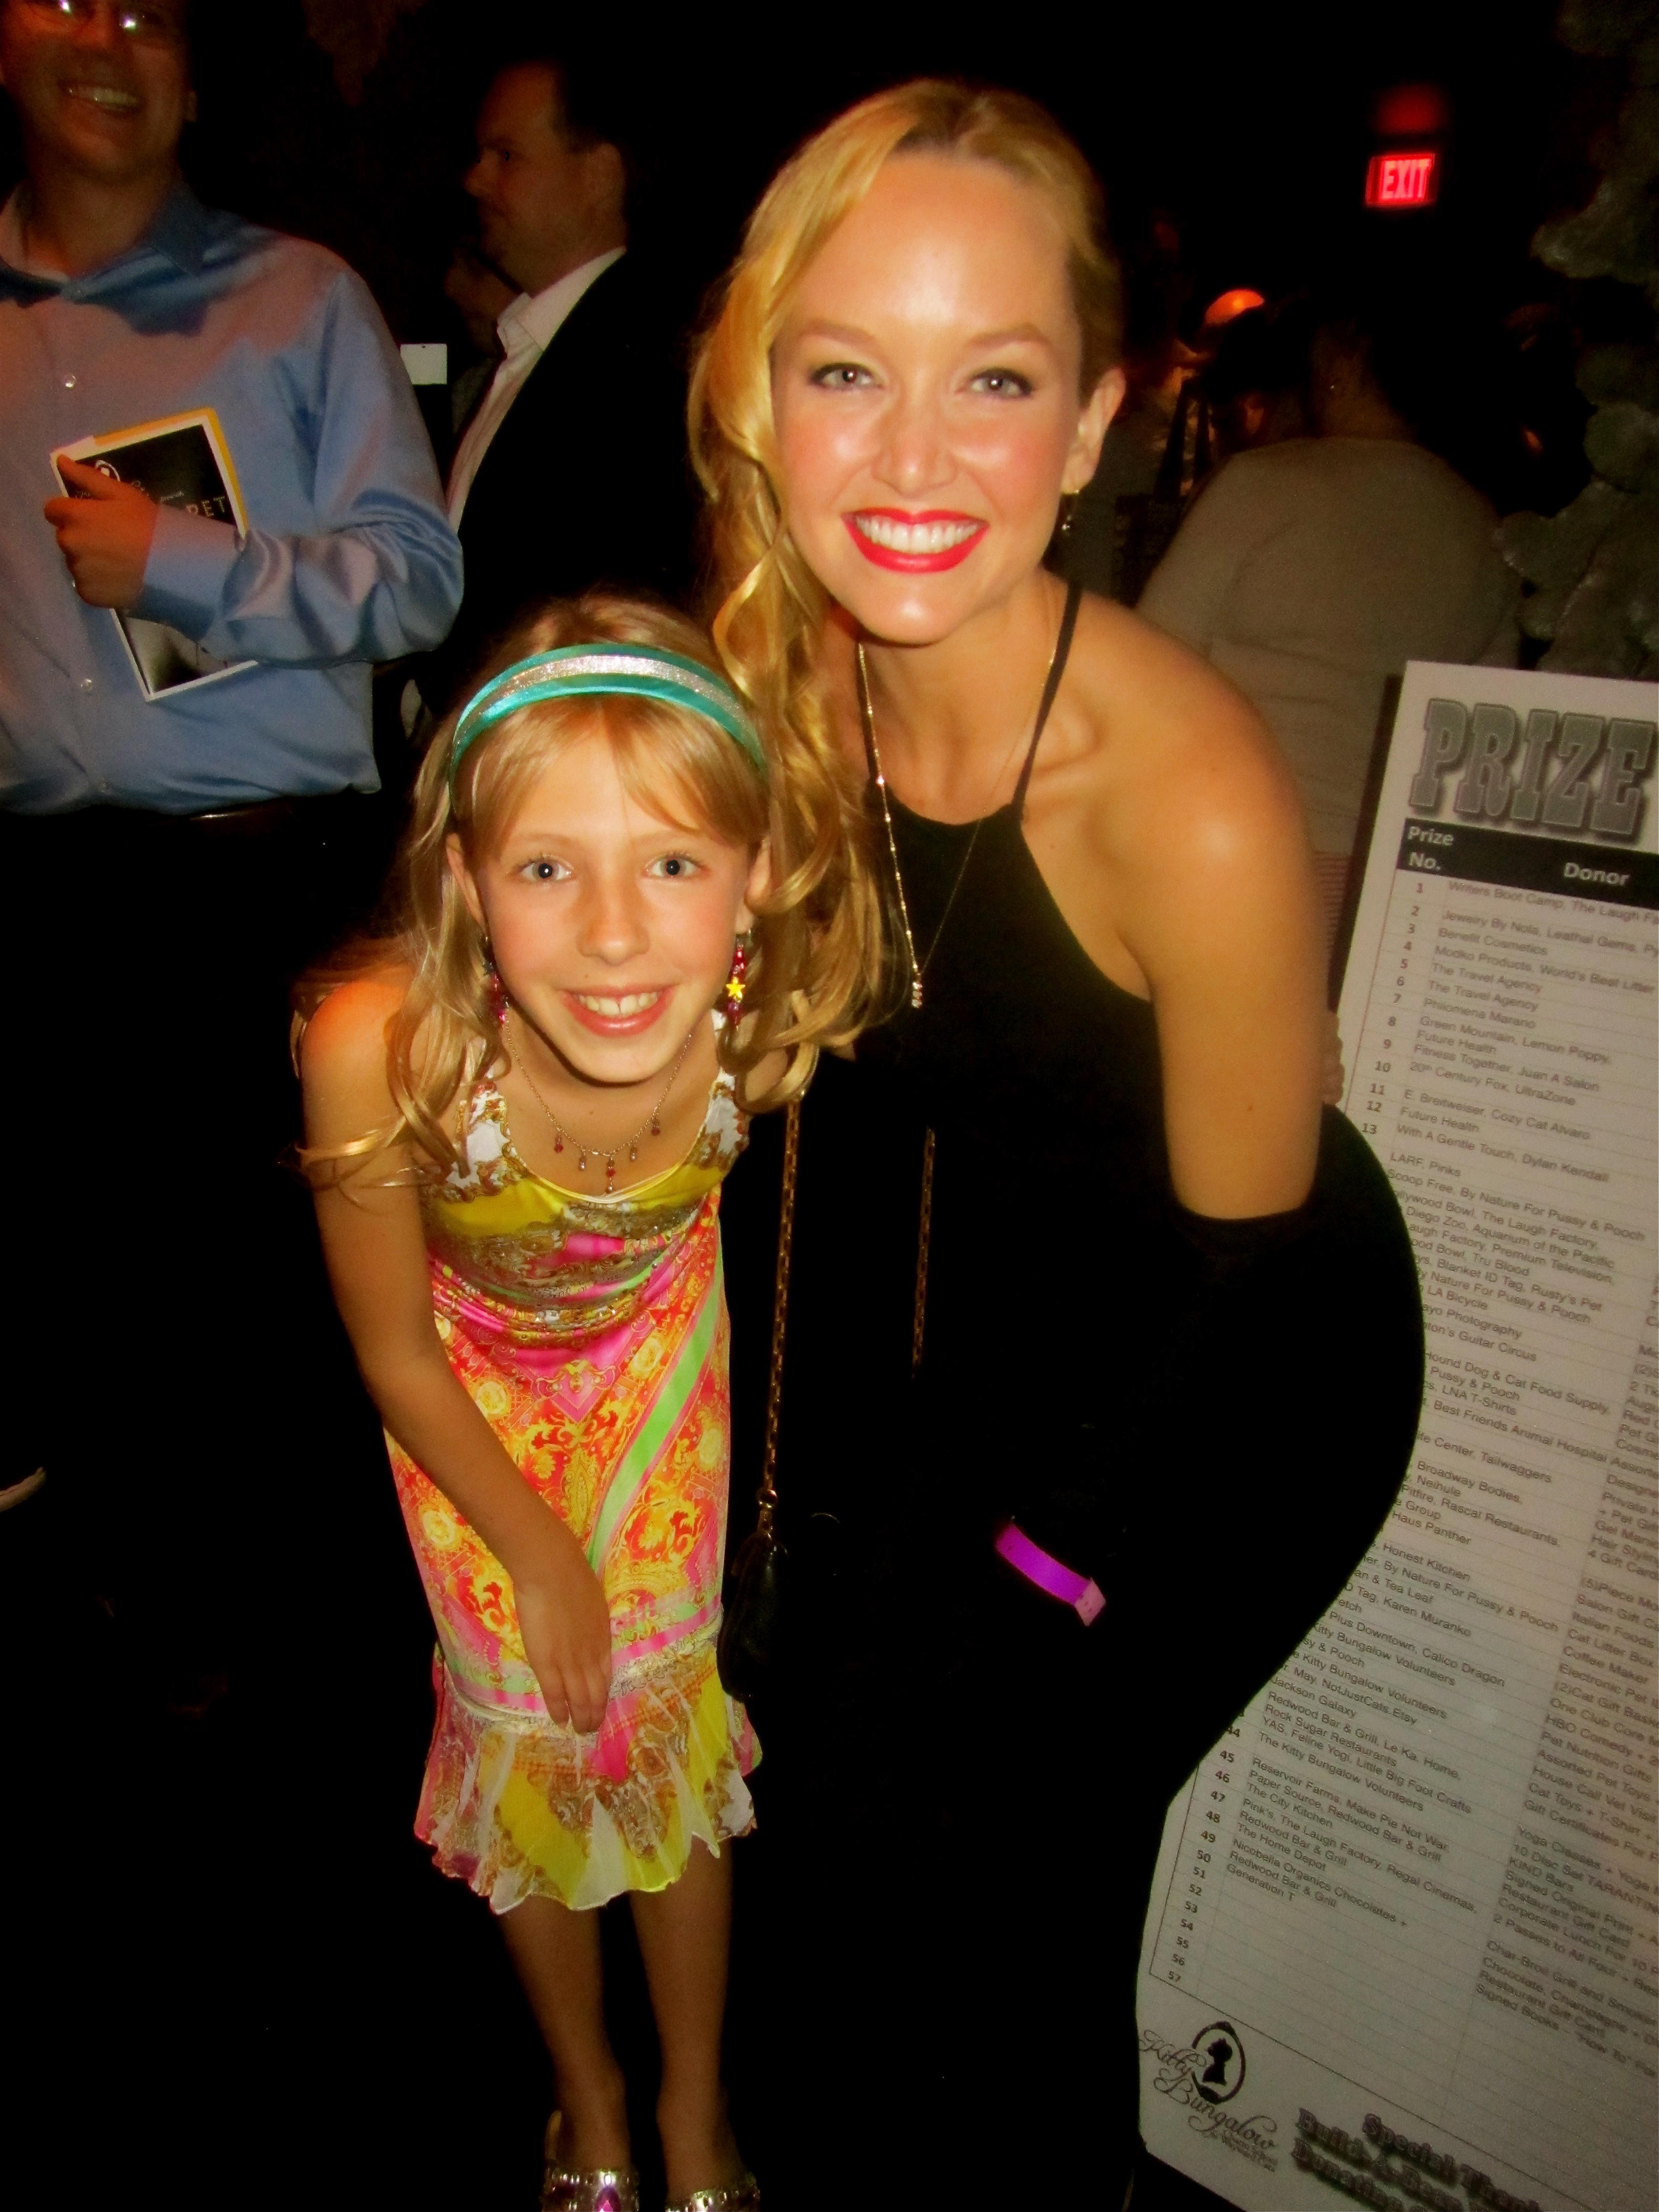 Hazel with Kelley Jakle (42, Pitch Perfect) after performing together in 